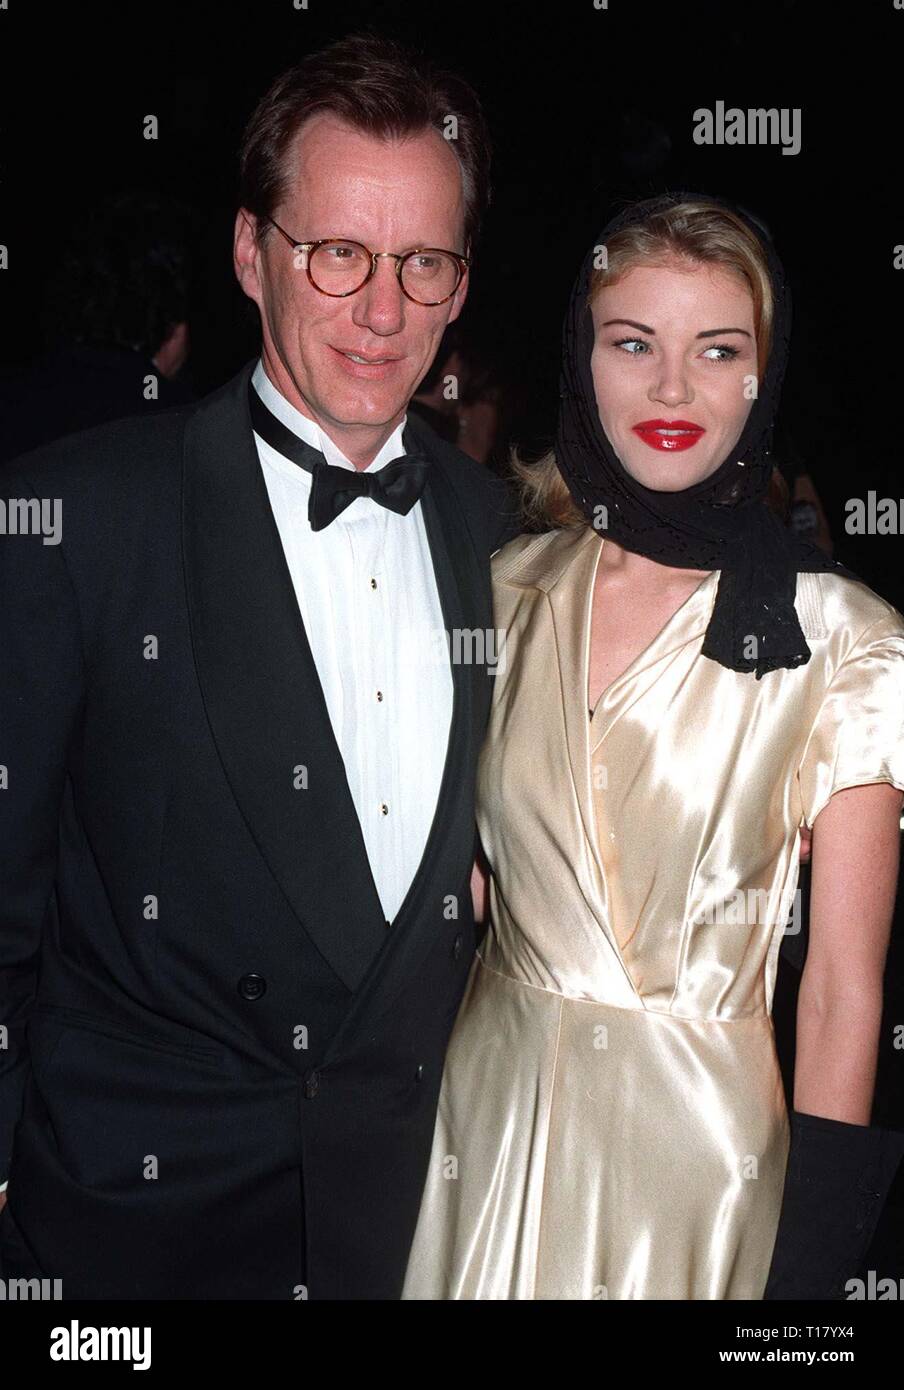 LOS ANGELES, CA. January 12, 1997:  Actor James Woods & girlfriend Missy at the Peoples Choice Awards. Stock Photo